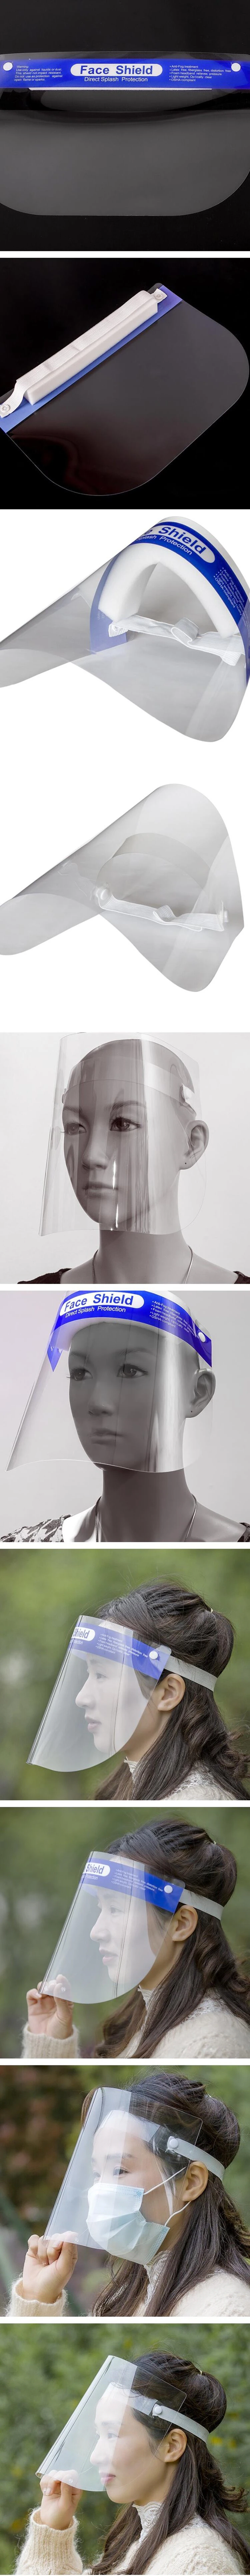 High Quality Reusable Protective Full Face Shield Anti Fog Safety Visor Eye Face Cover Protective Shields